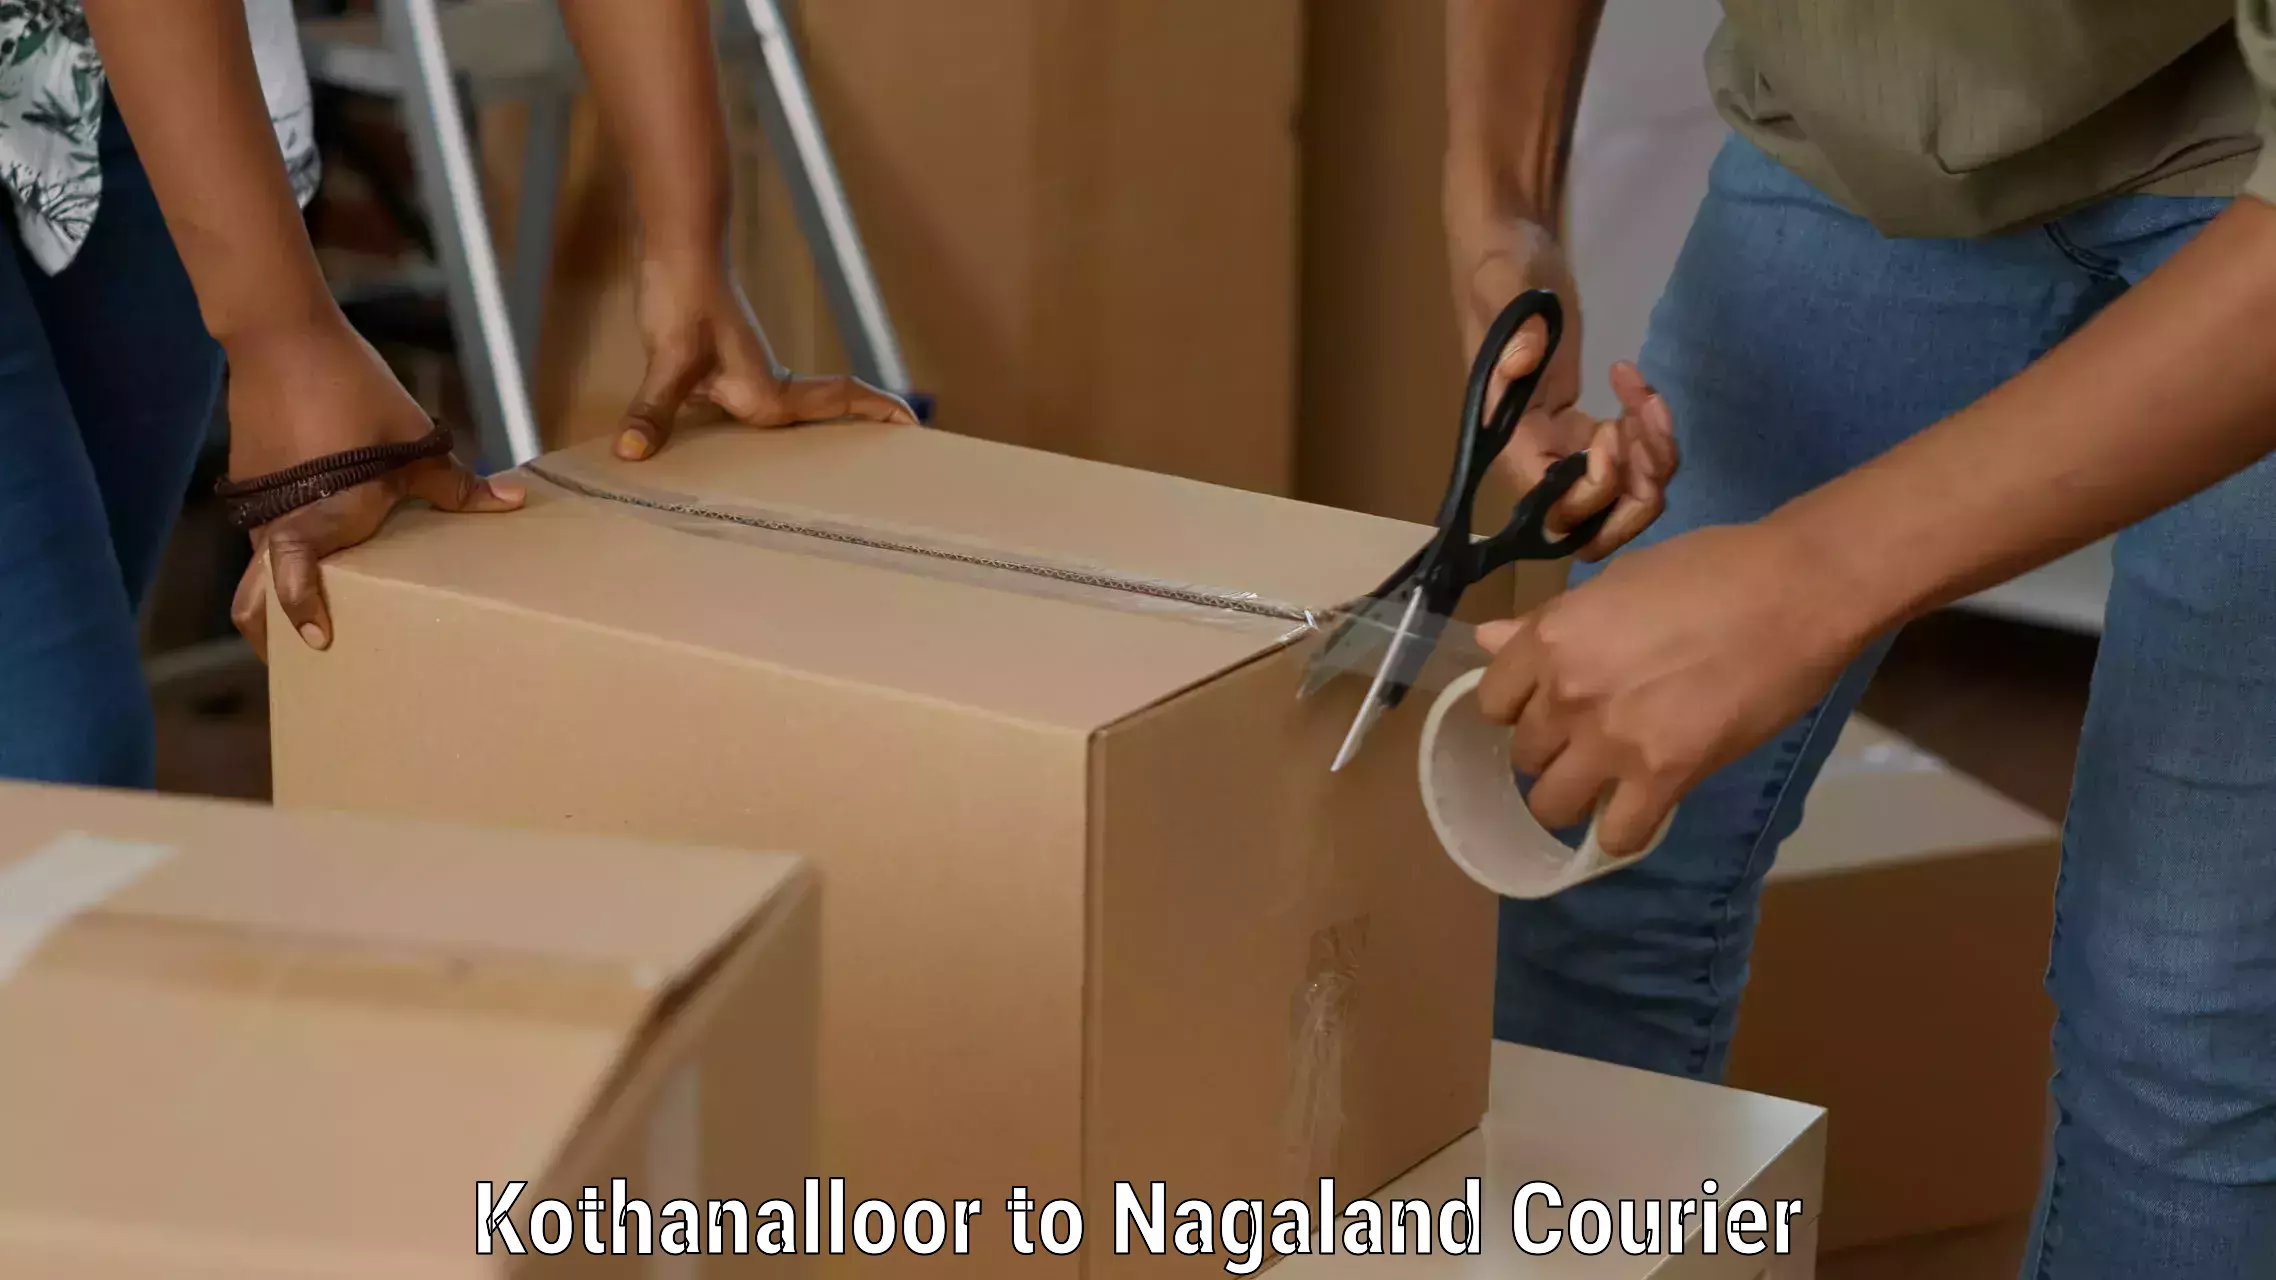 24/7 courier service in Kothanalloor to Mon